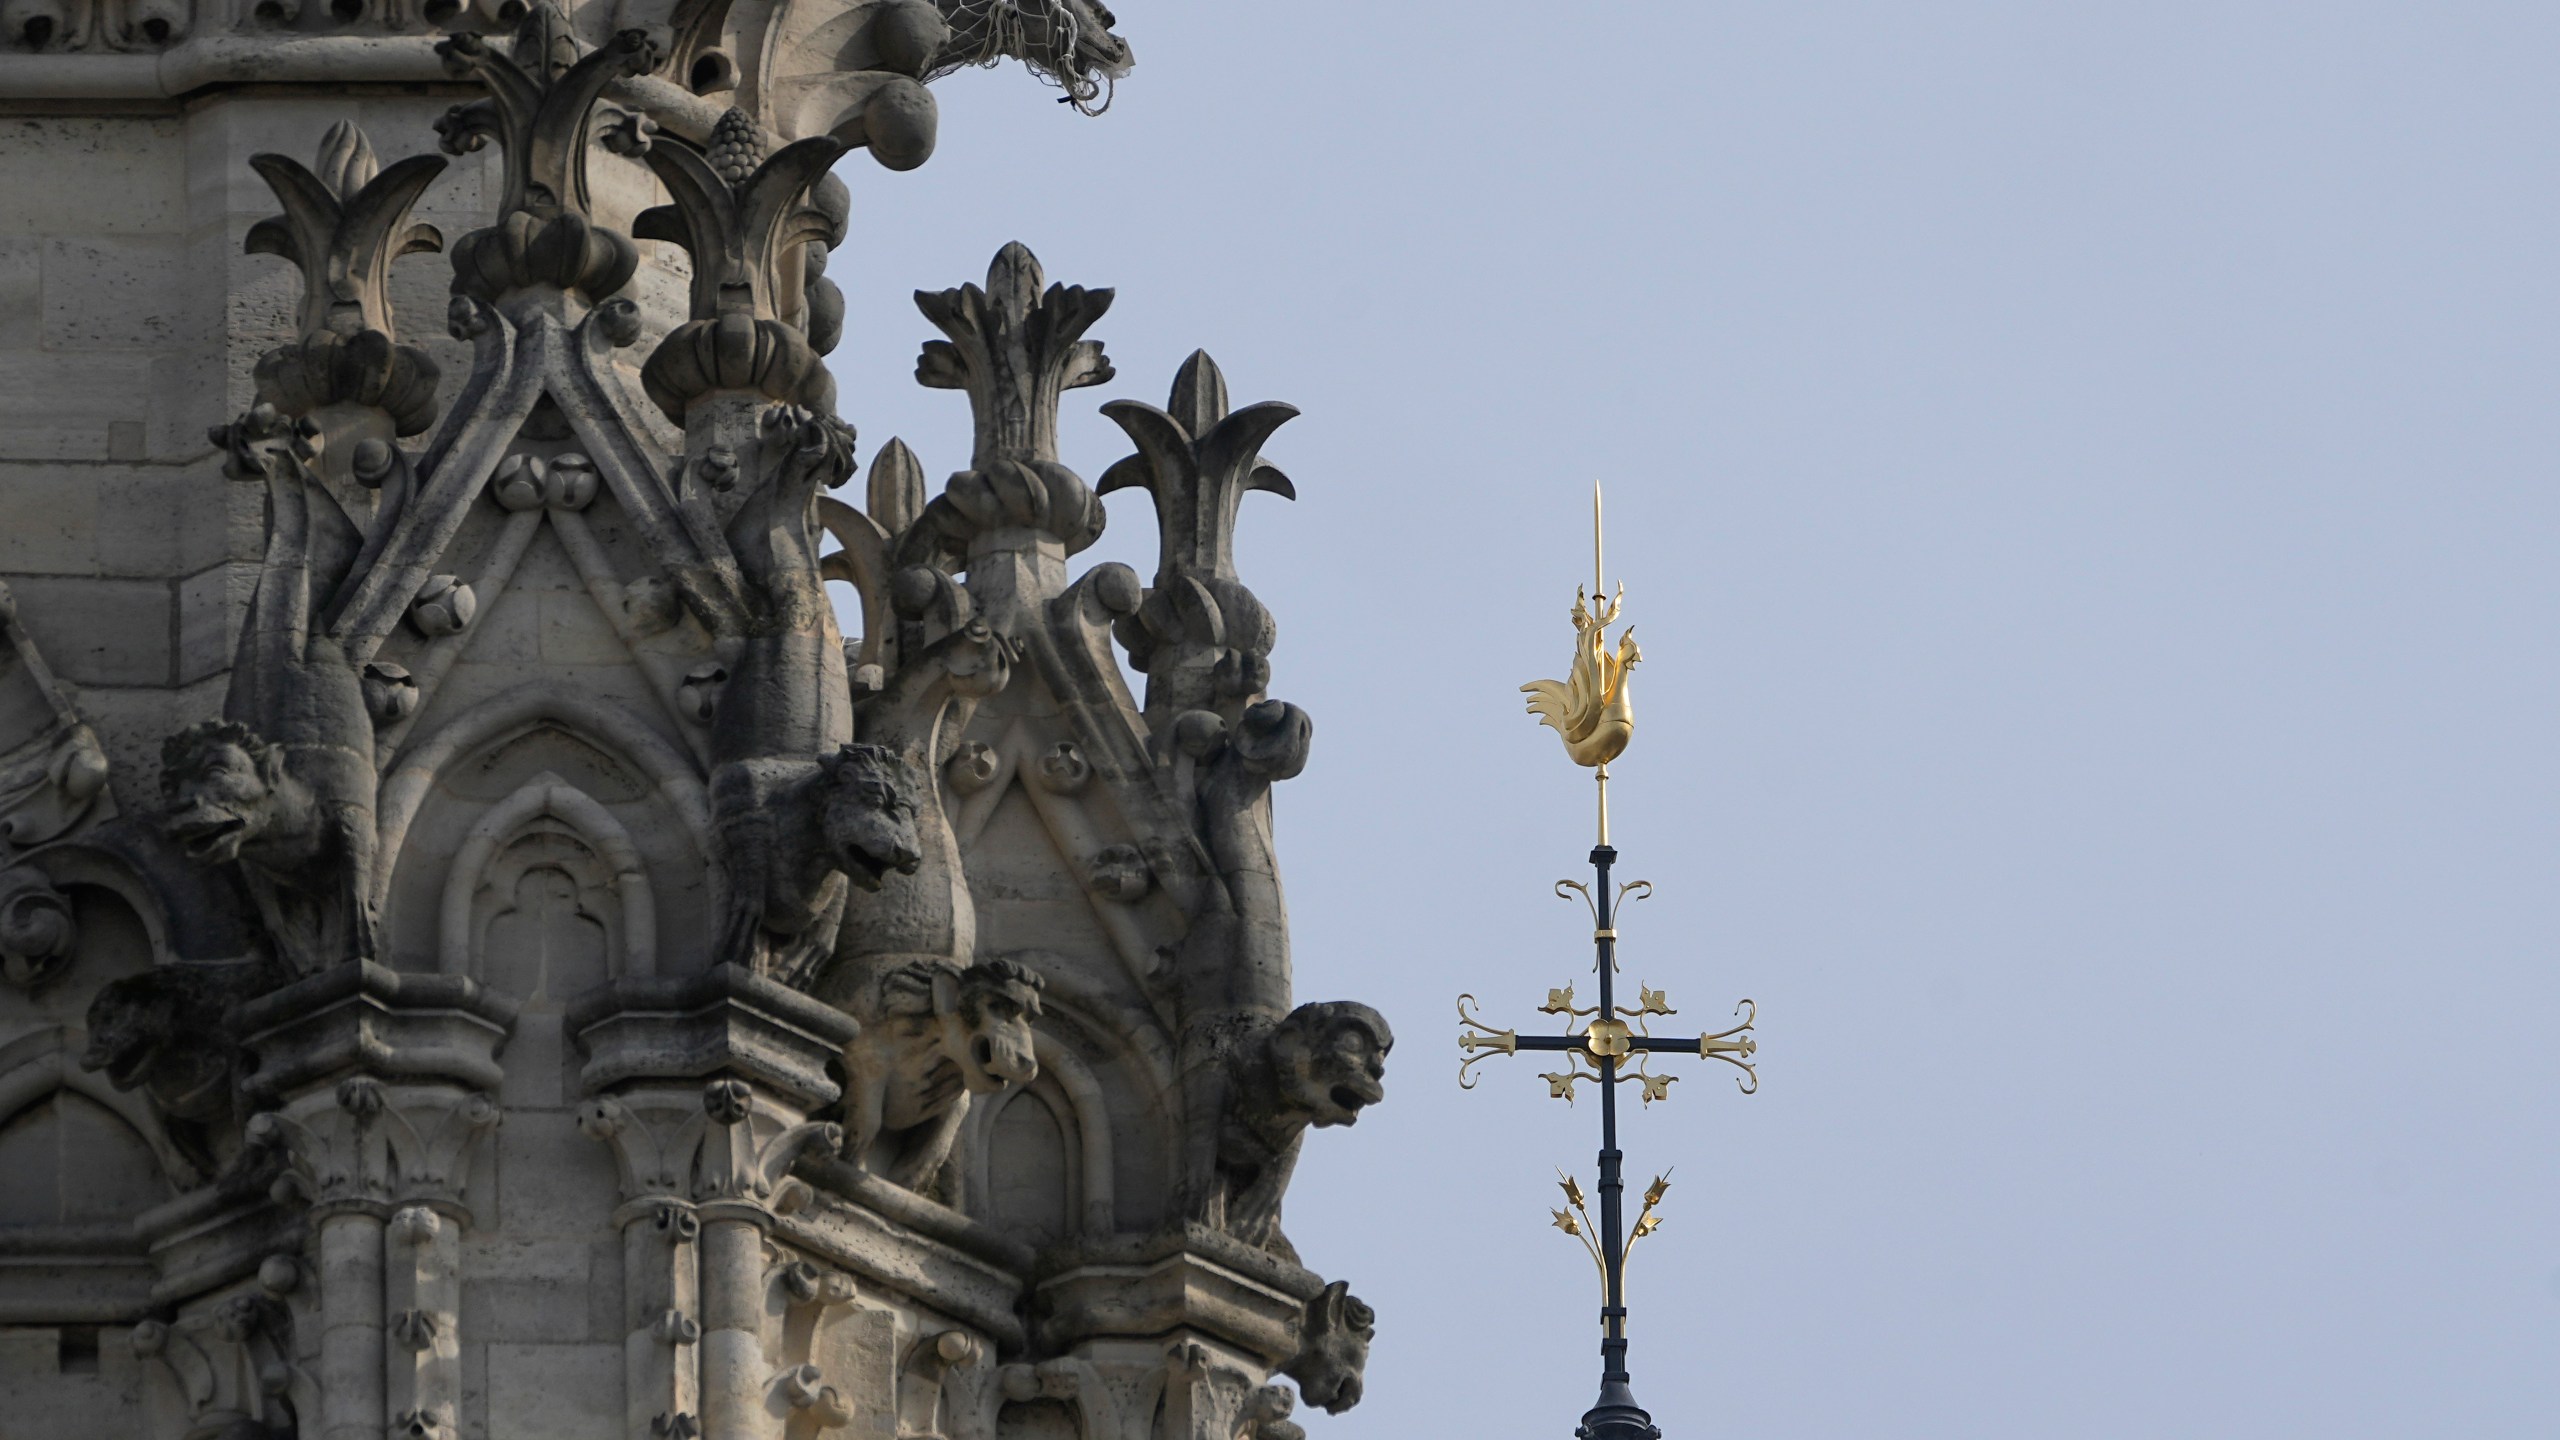 The cross and the rooster atop the Notre Dame de Paris cathedral spire, Thursday, March 14, 2024 in Paris. Scaffolding has enshrouded Notre Dame Cathedral in Paris since a 2019 fire destroyed its spire and roof and threatened to collapse the whole medieval structure. After an unprecedented international reconstruction effort, the scaffolding is at last starting to peel away. (AP Photo/Michel Euler)